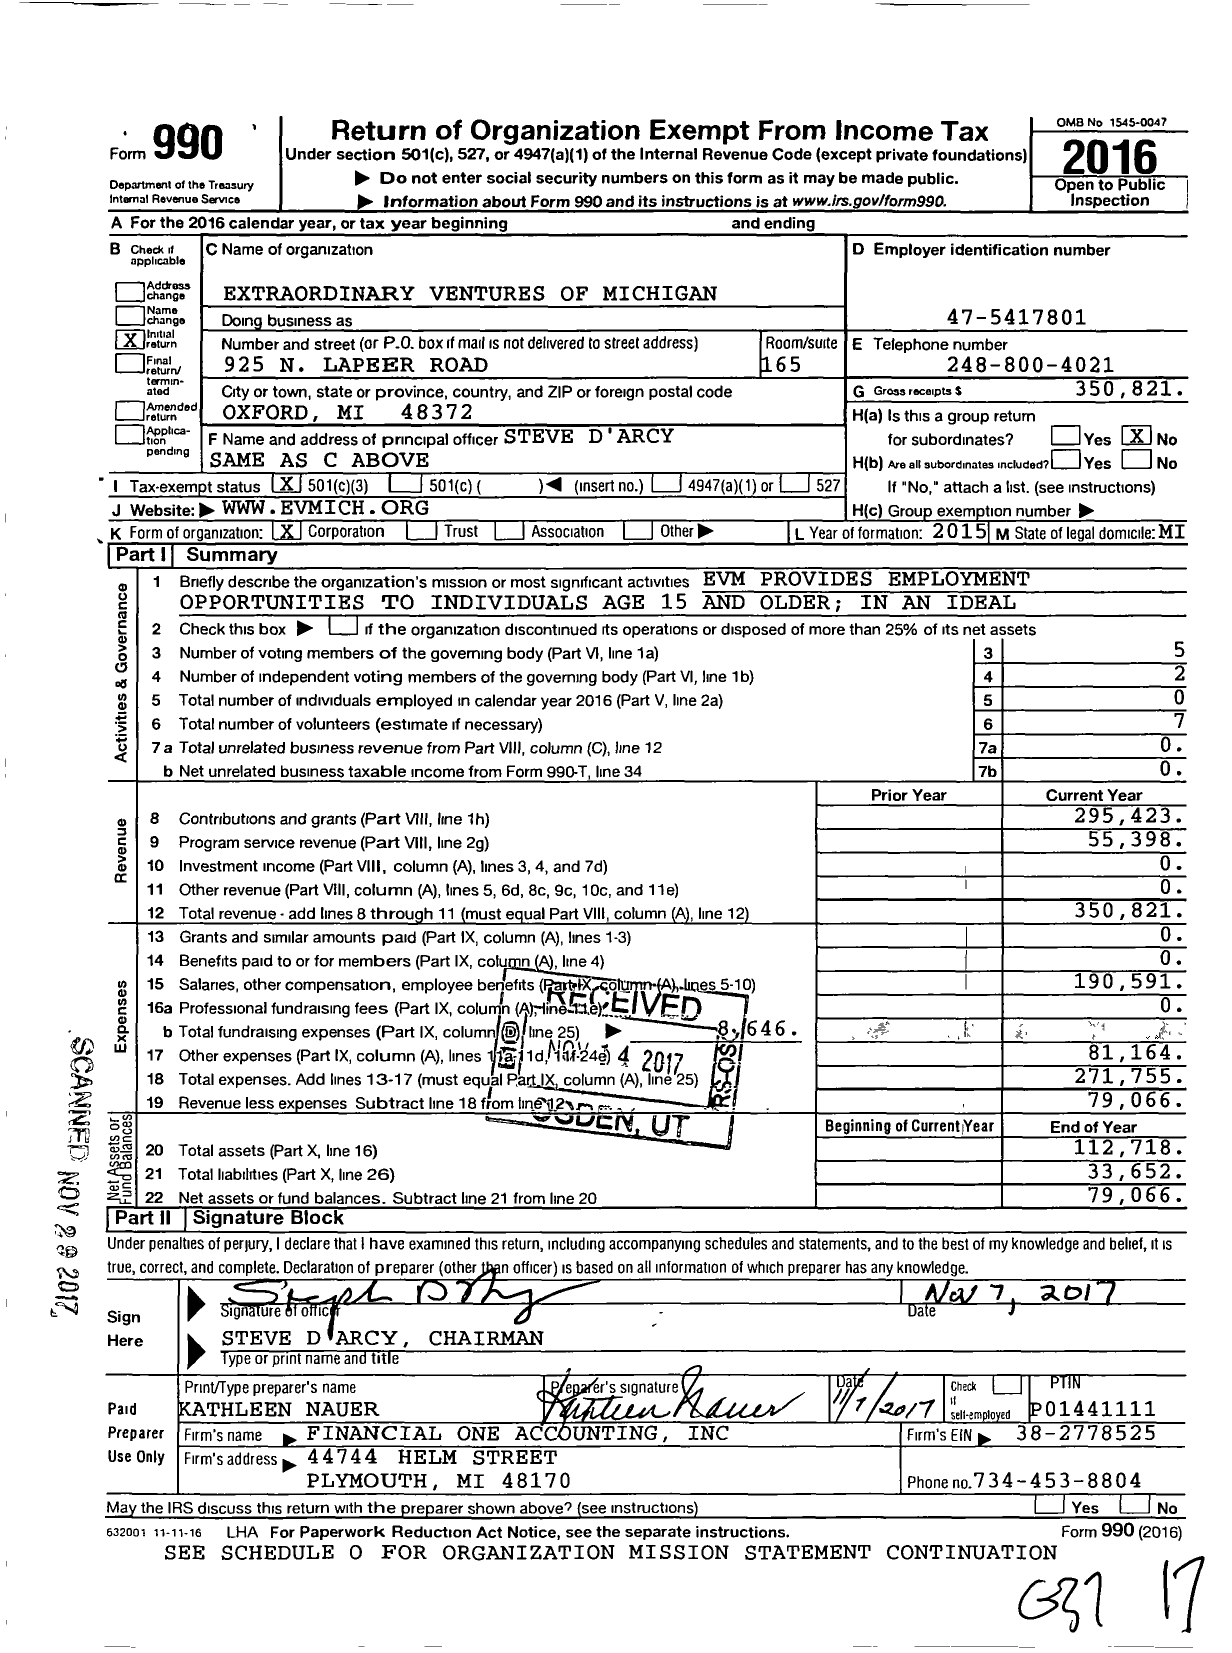 Image of first page of 2016 Form 990 for Extraordinary Ventures of Michigan